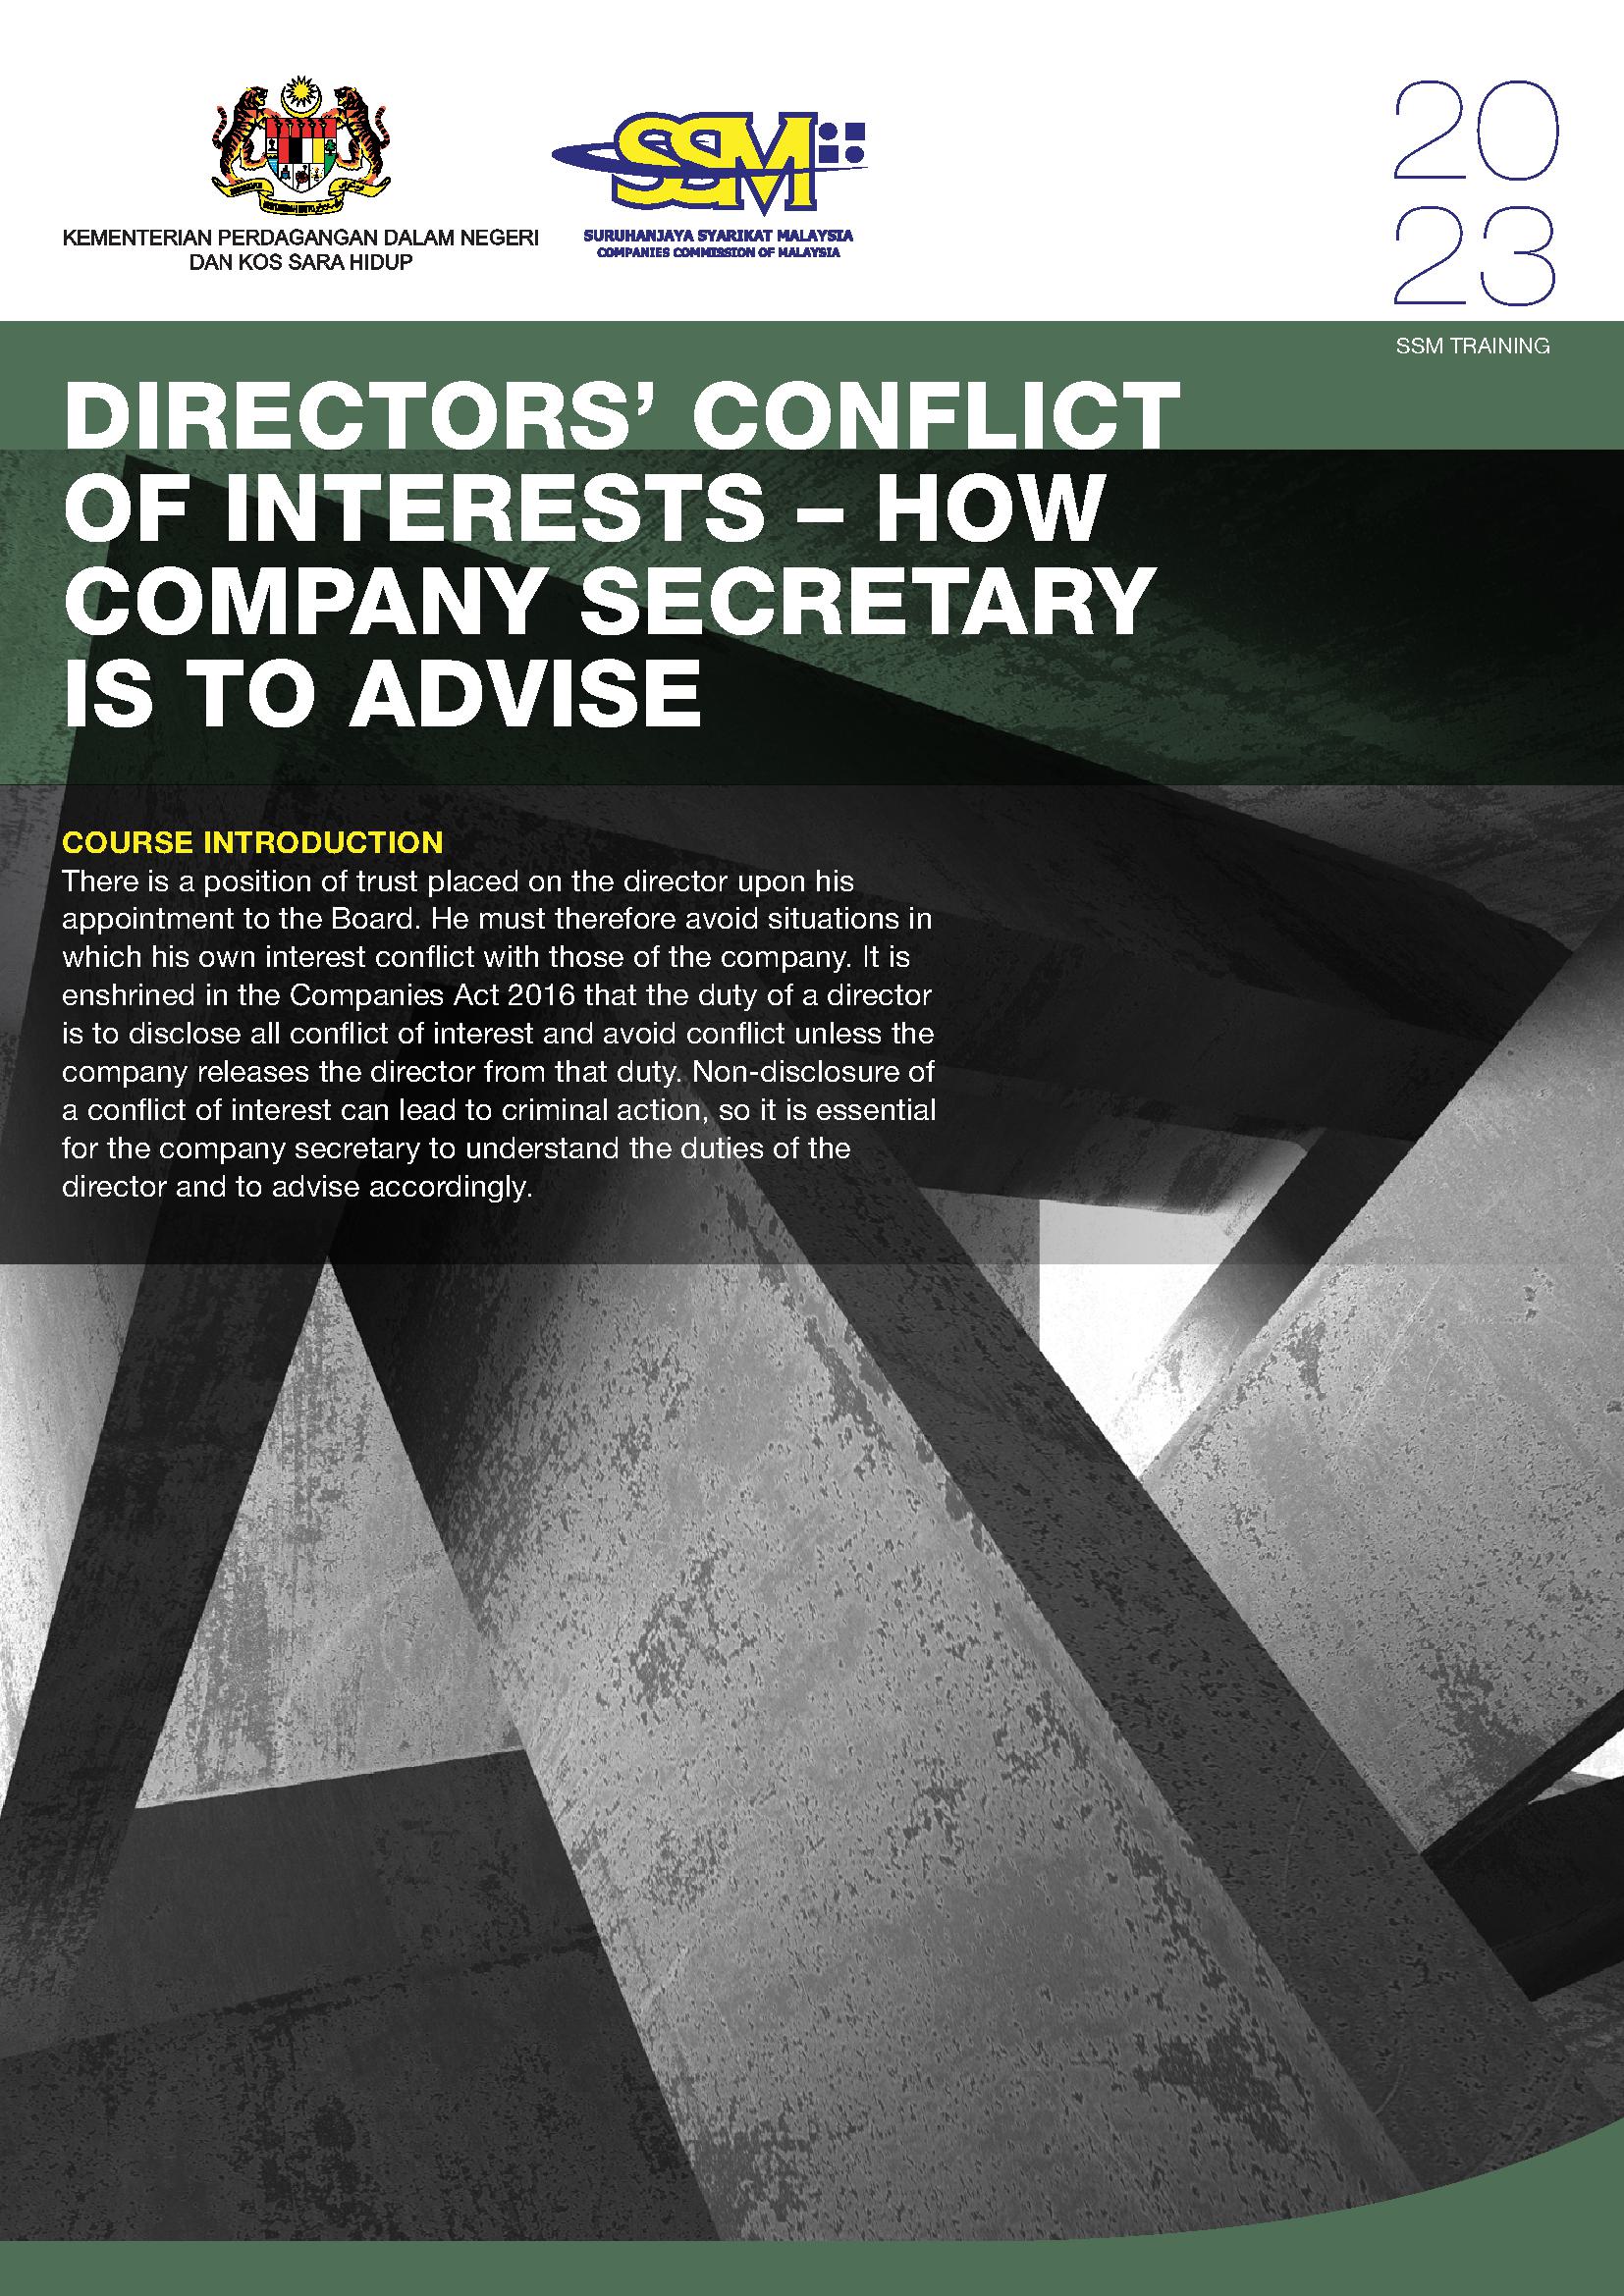 DIRECTORS’ CONFLICT OF INTERESTS – HOW COMPANY SECRETARY IS TO ADVISE.jpg